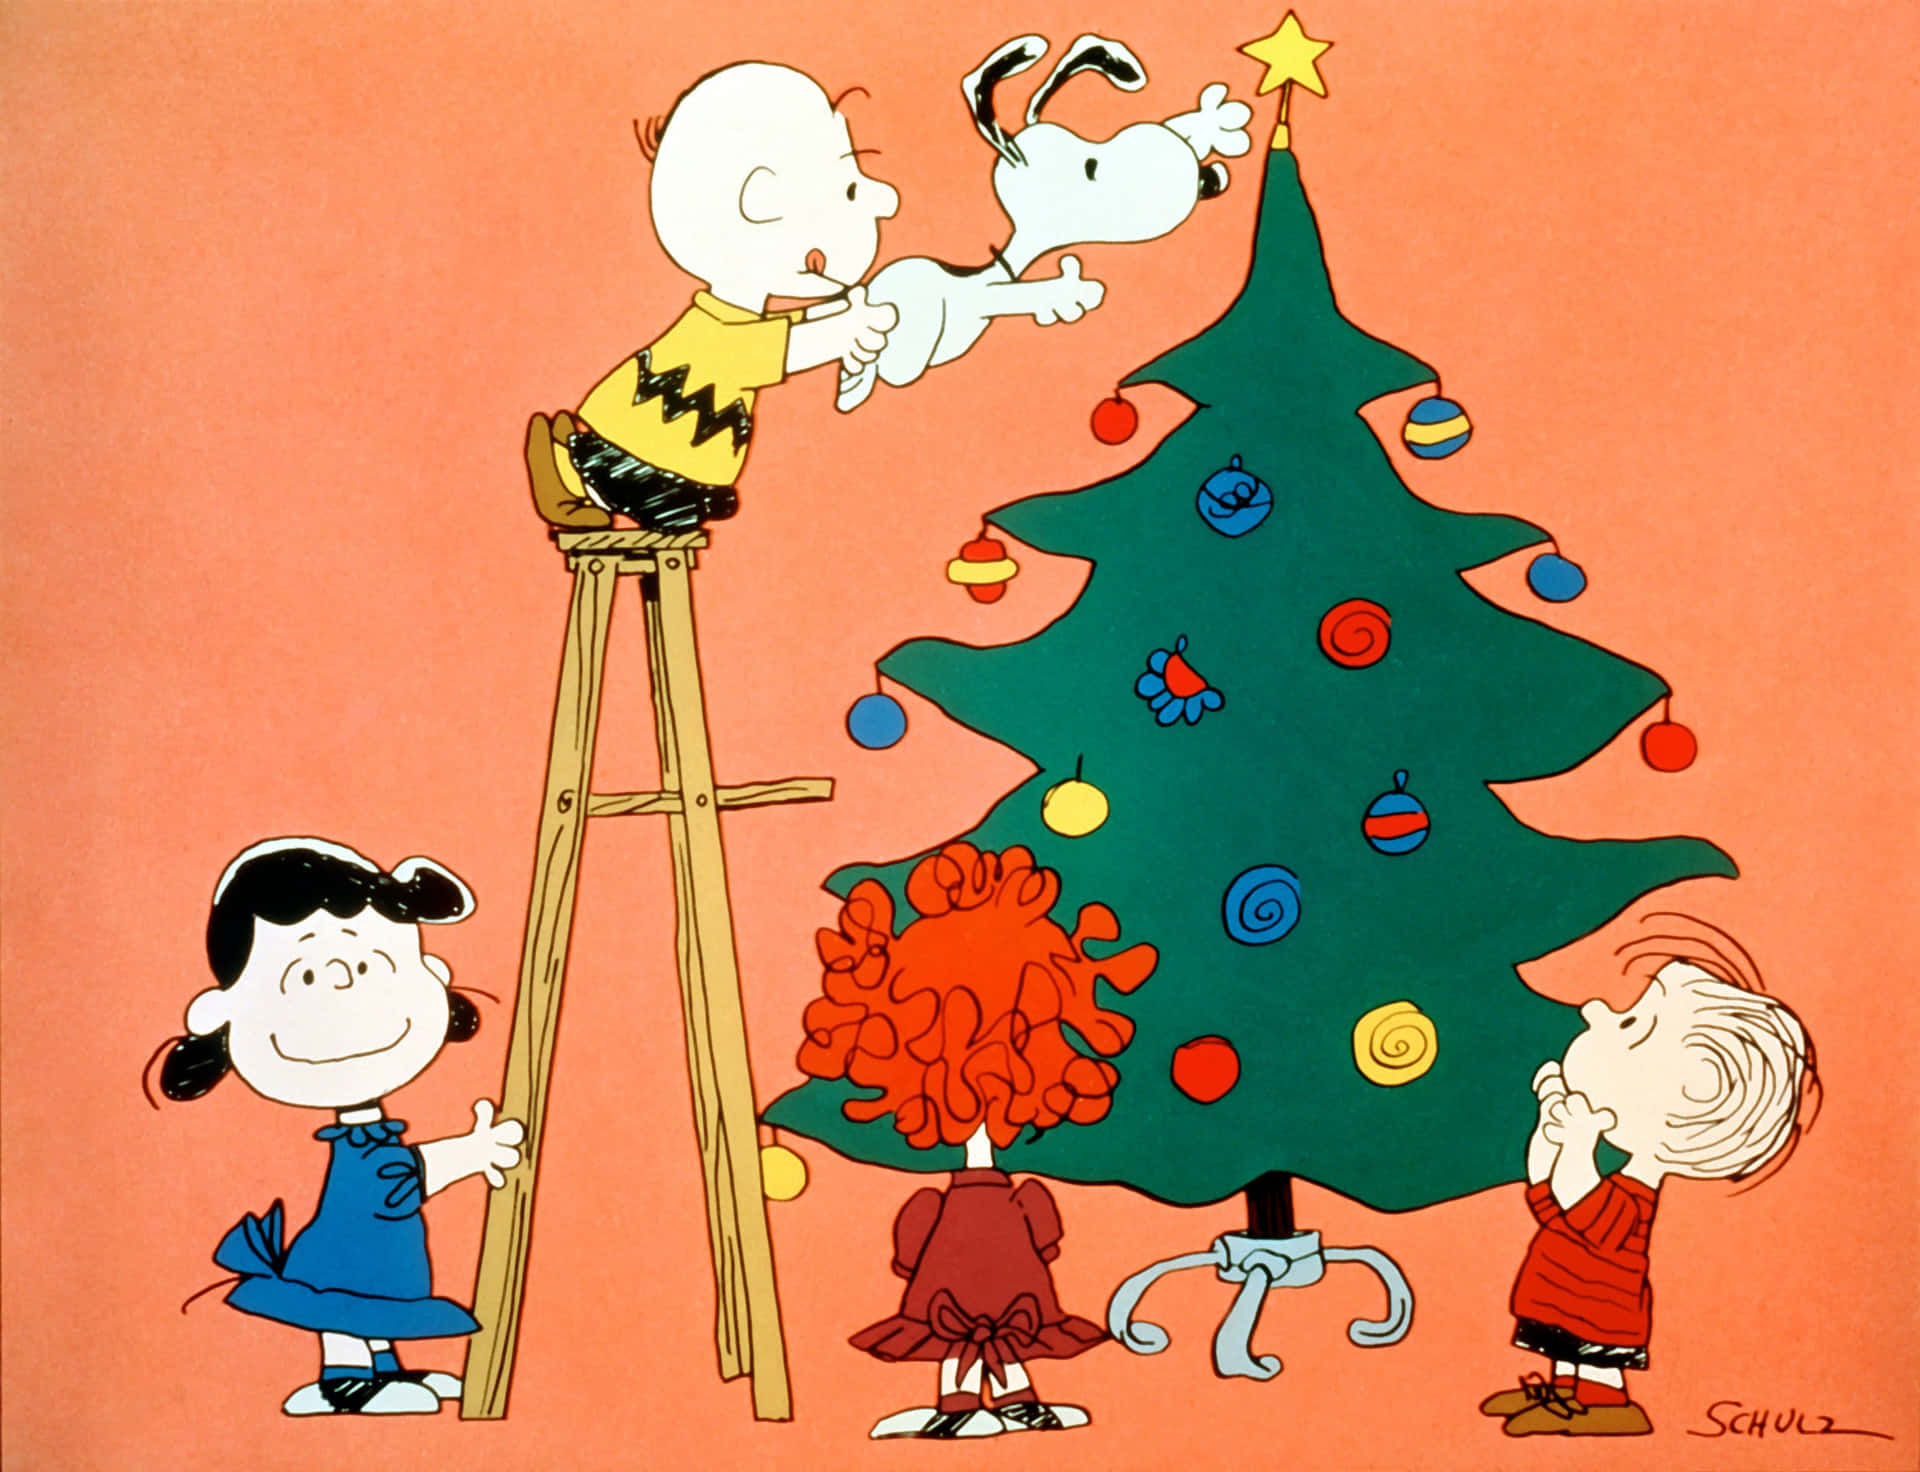 Snoopy Brings Joy to the World!